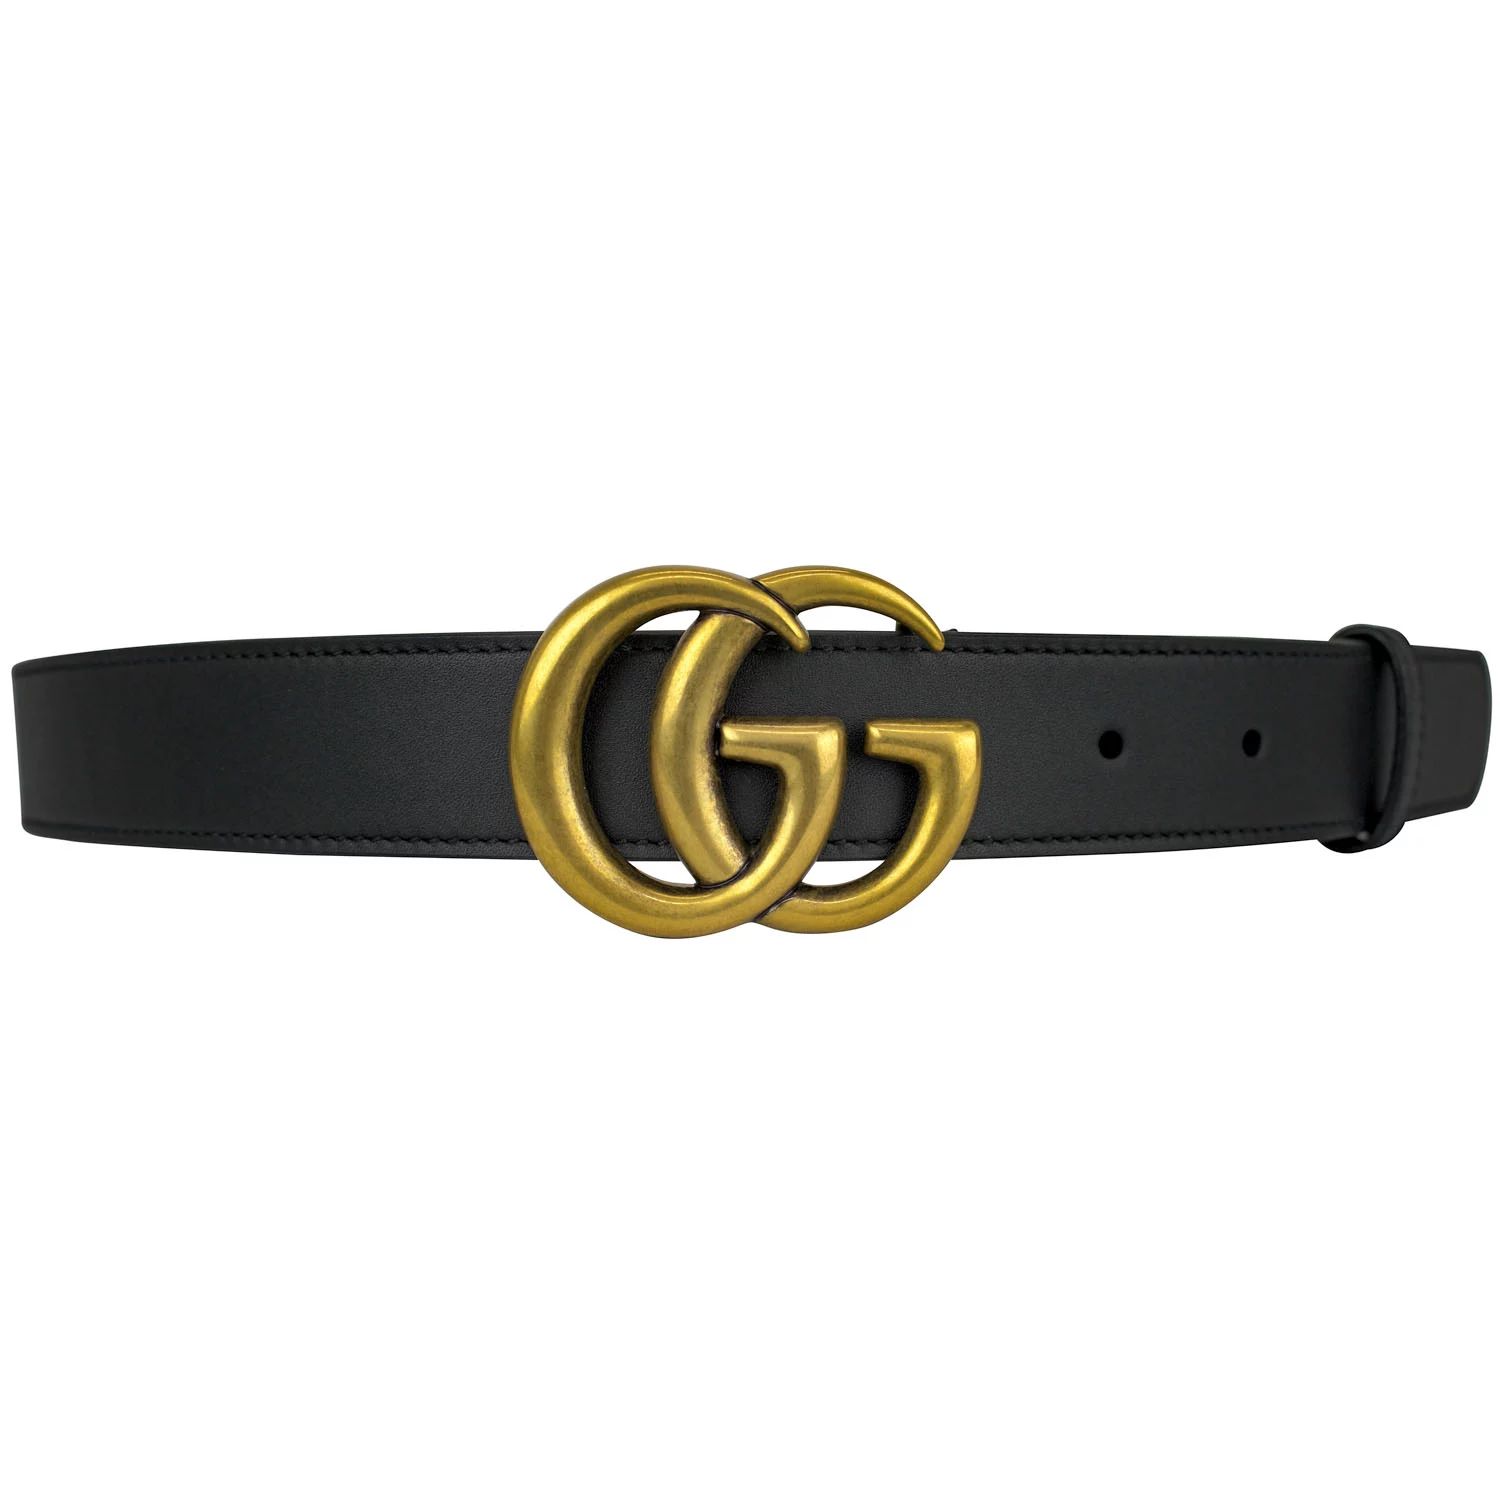 Gucci Slim Leather Belt with Double G Buckle | Sam's Club